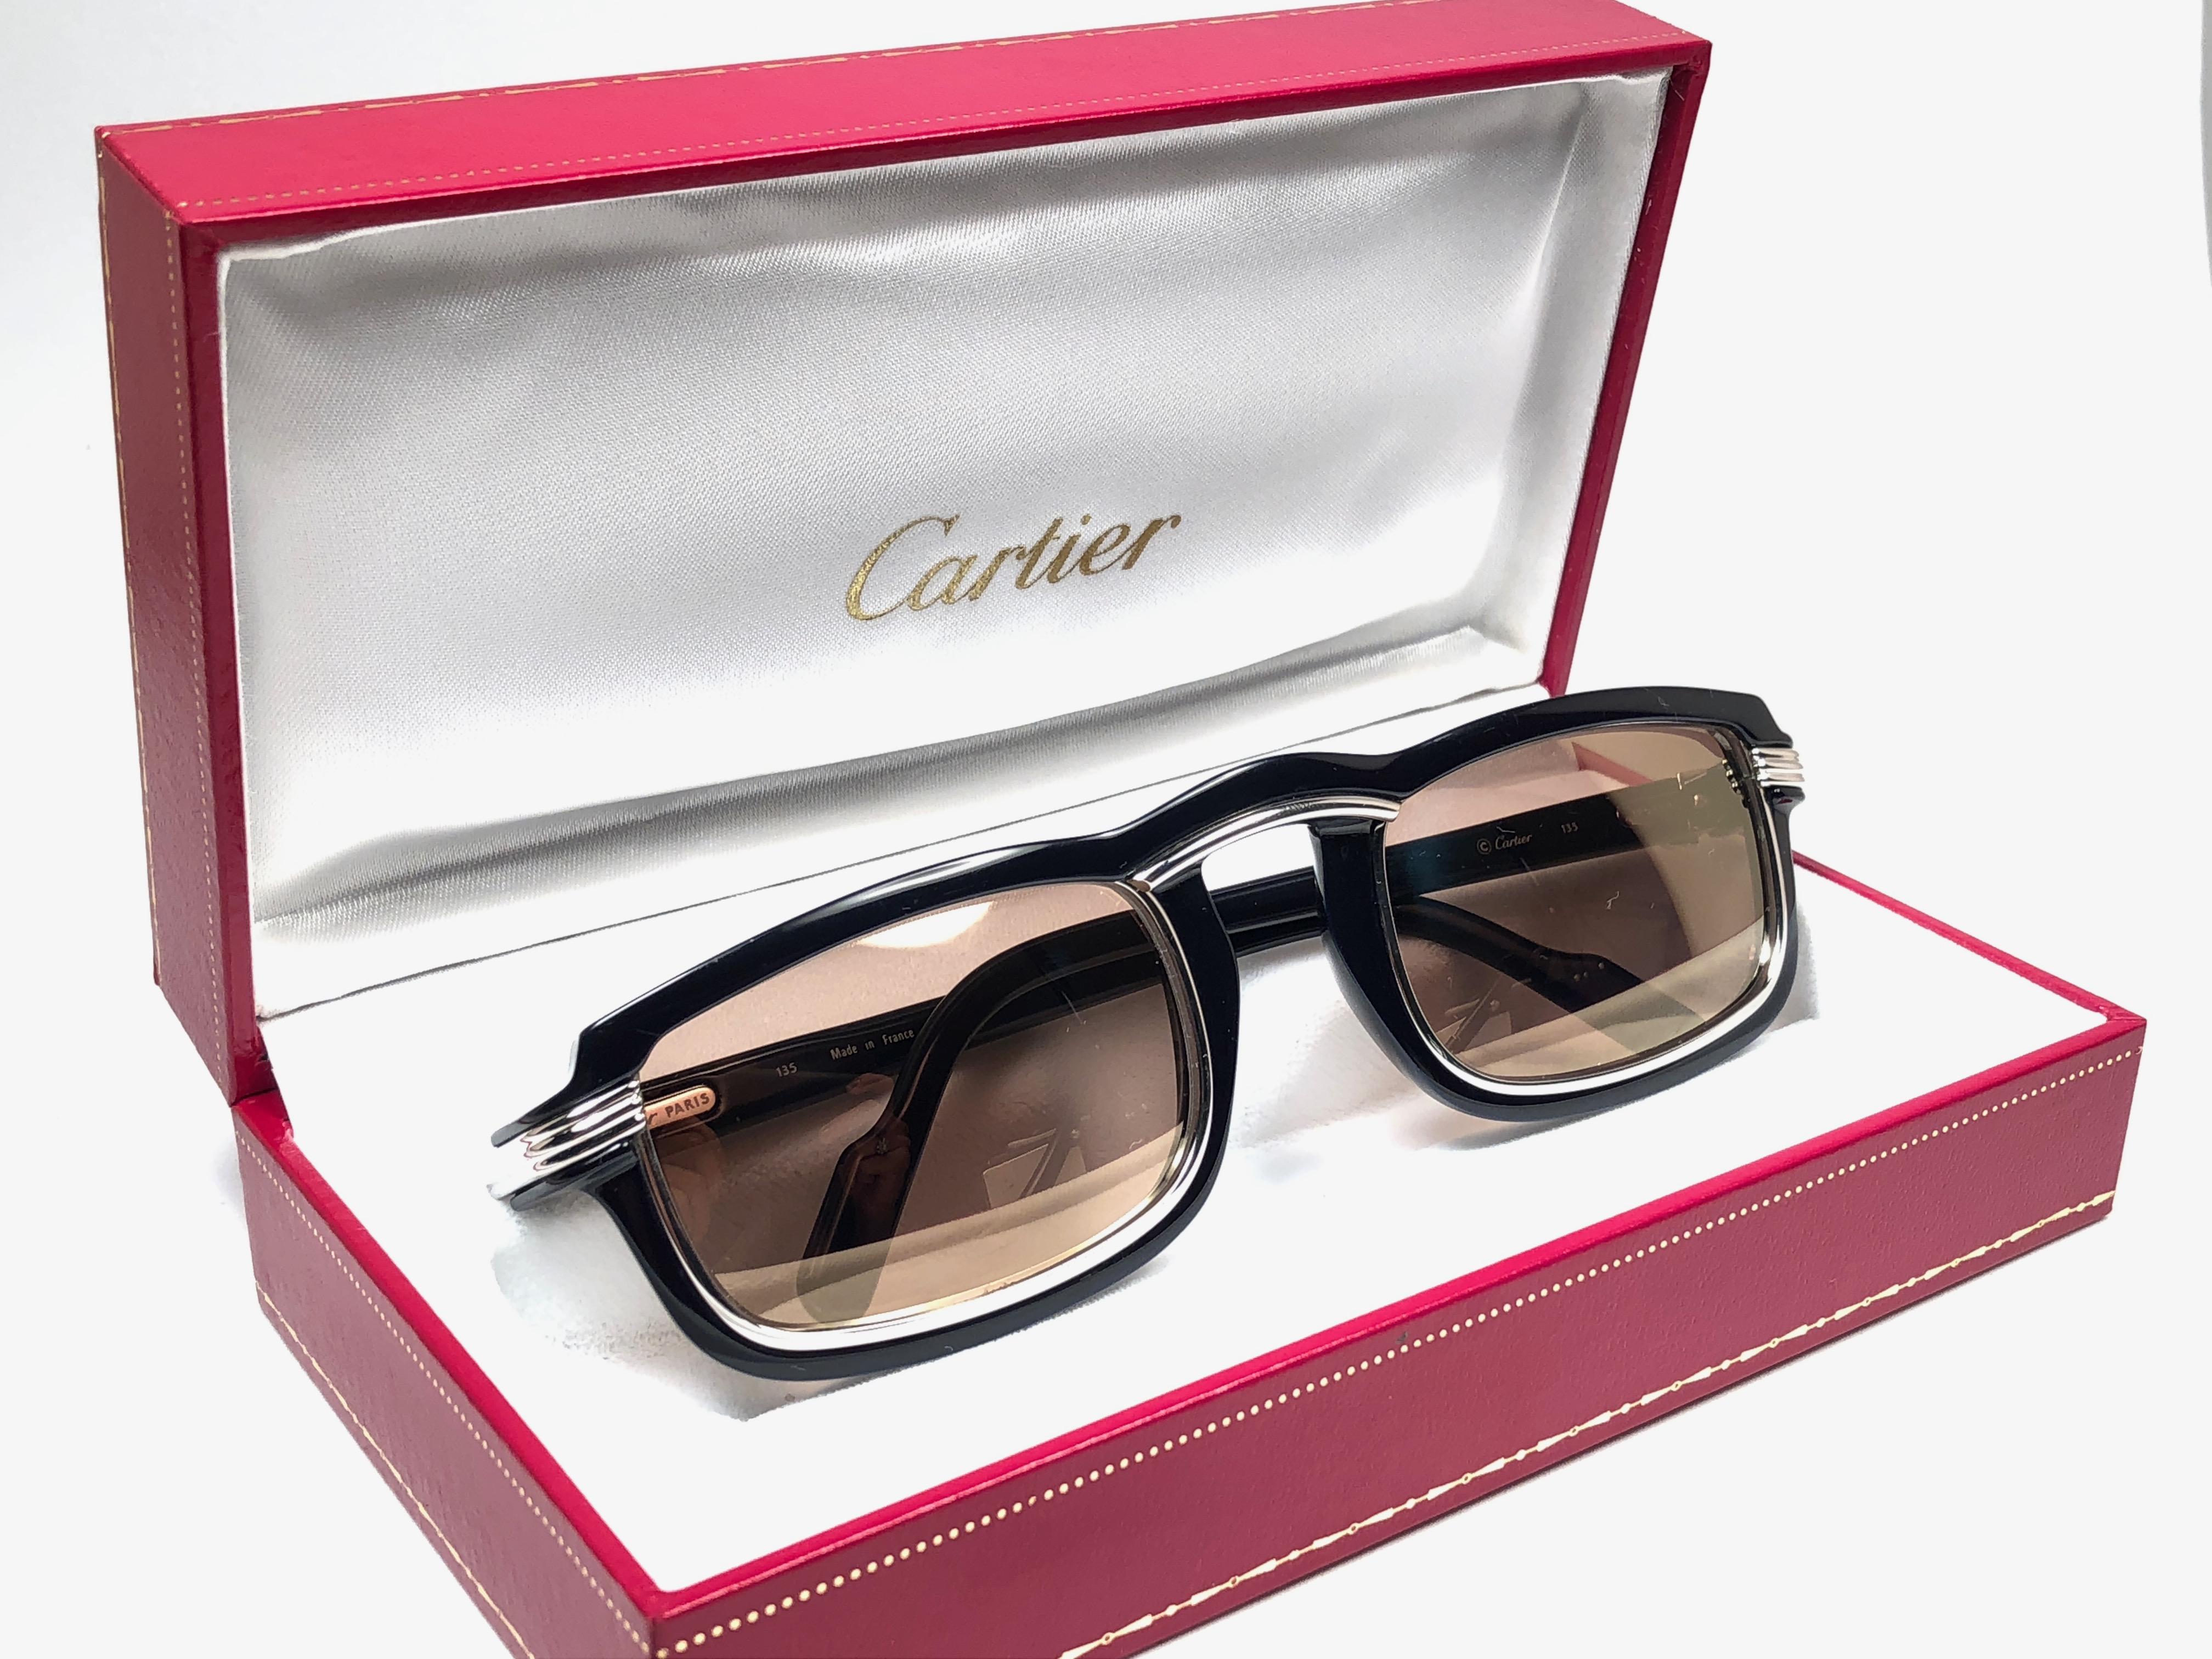 1991 Original Cartier Vertigo Art Deco Sunglasses with spotless amazing brown medium lenses (uv protection). 
Frame has the famous platinum accents in the middle and on the sides.
All hallmarks. Cartier signs on the earpaddles. Both arms sport the C